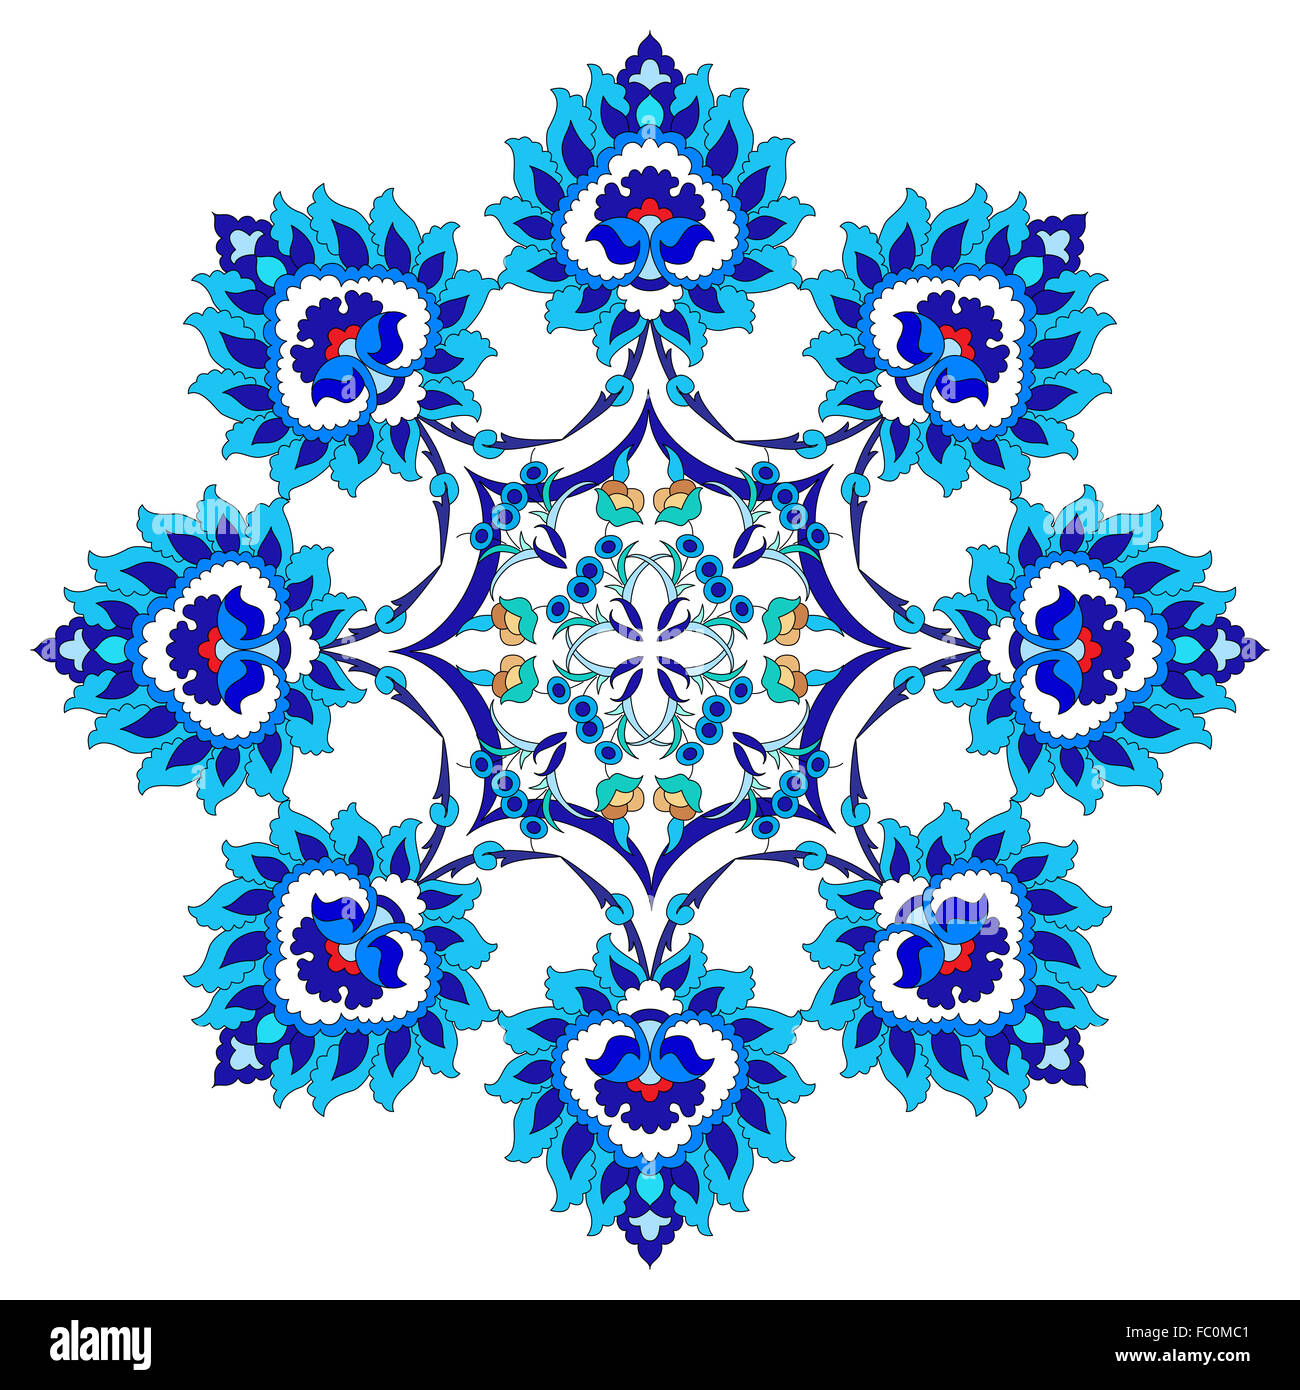 artistic ottoman pattern series fifty one Stock Photo